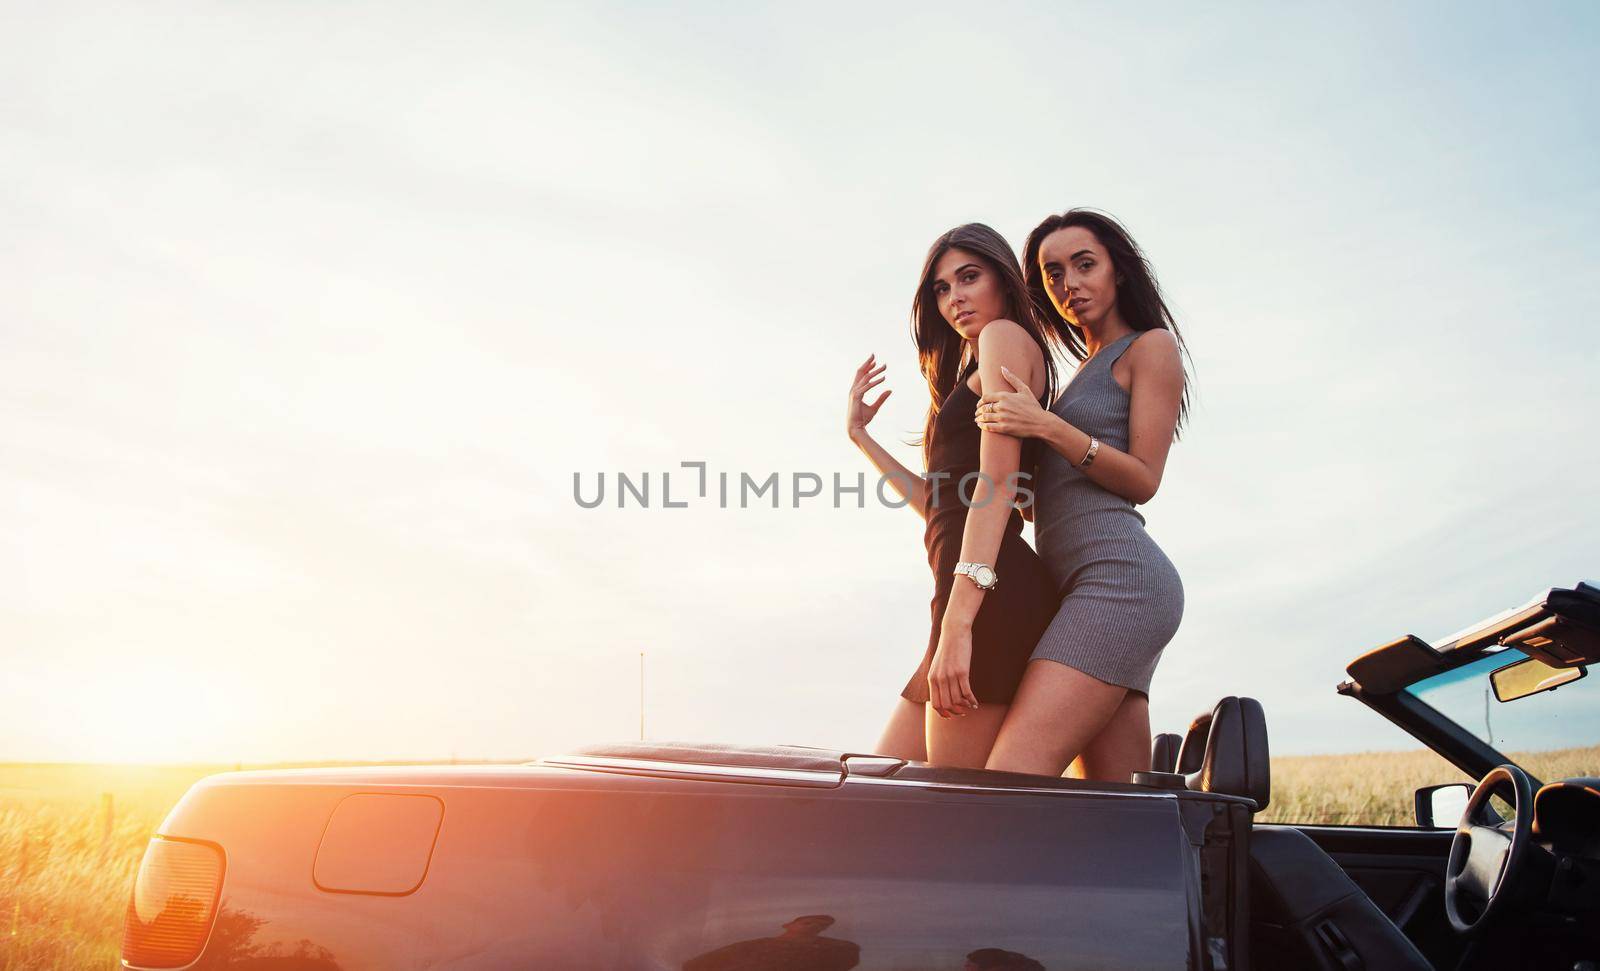 Two girls happy to pose next a black car against the sky on a fantastic sunset.